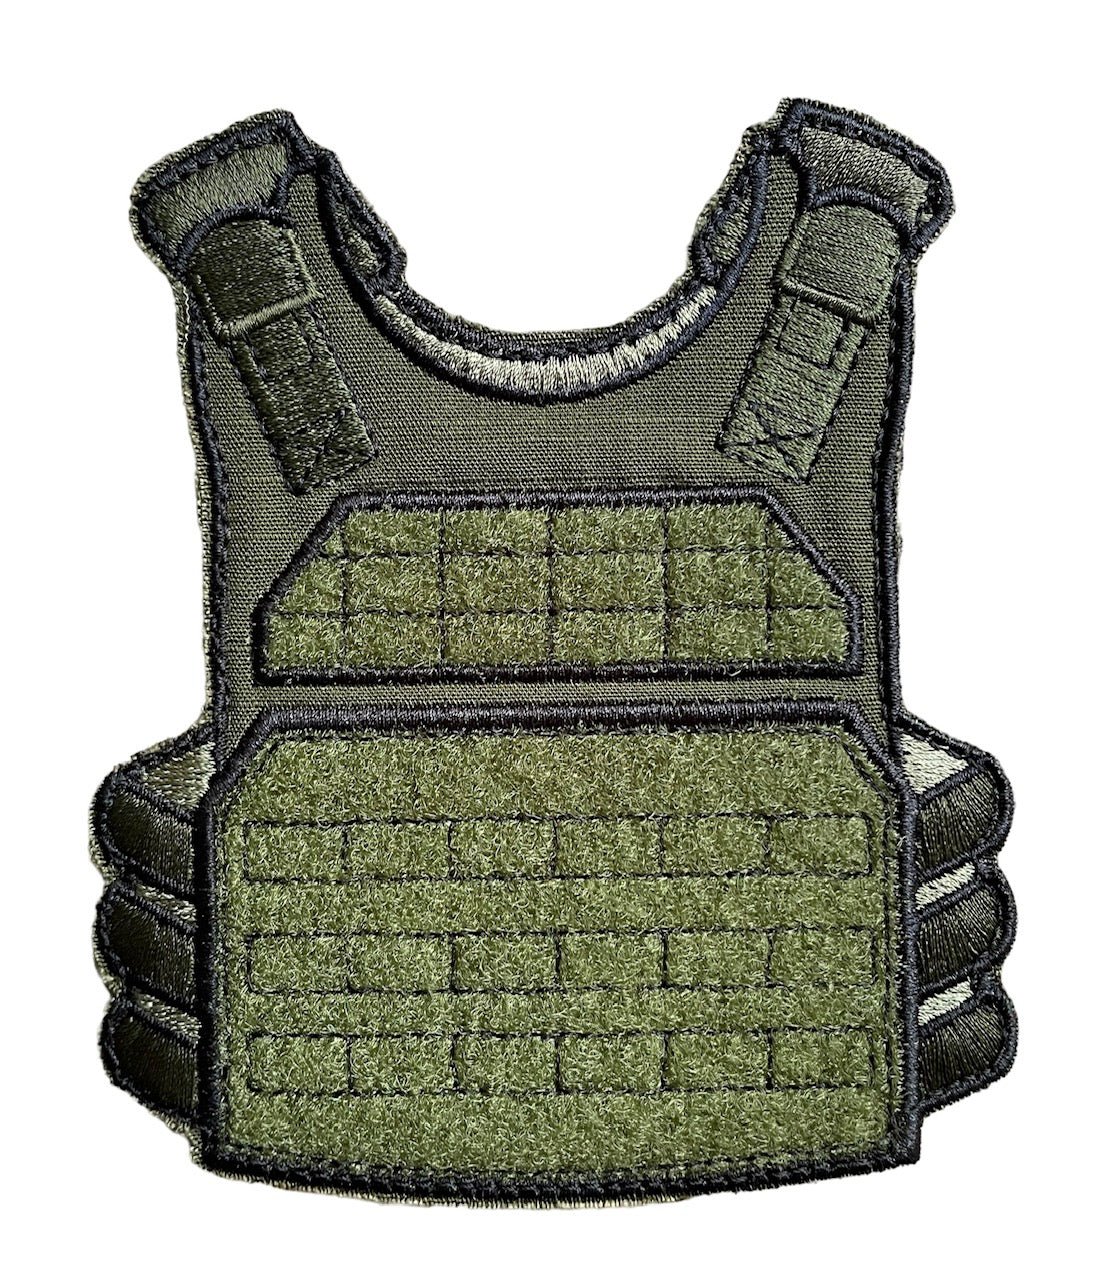 Mini Moral Plate Carrier and Patches